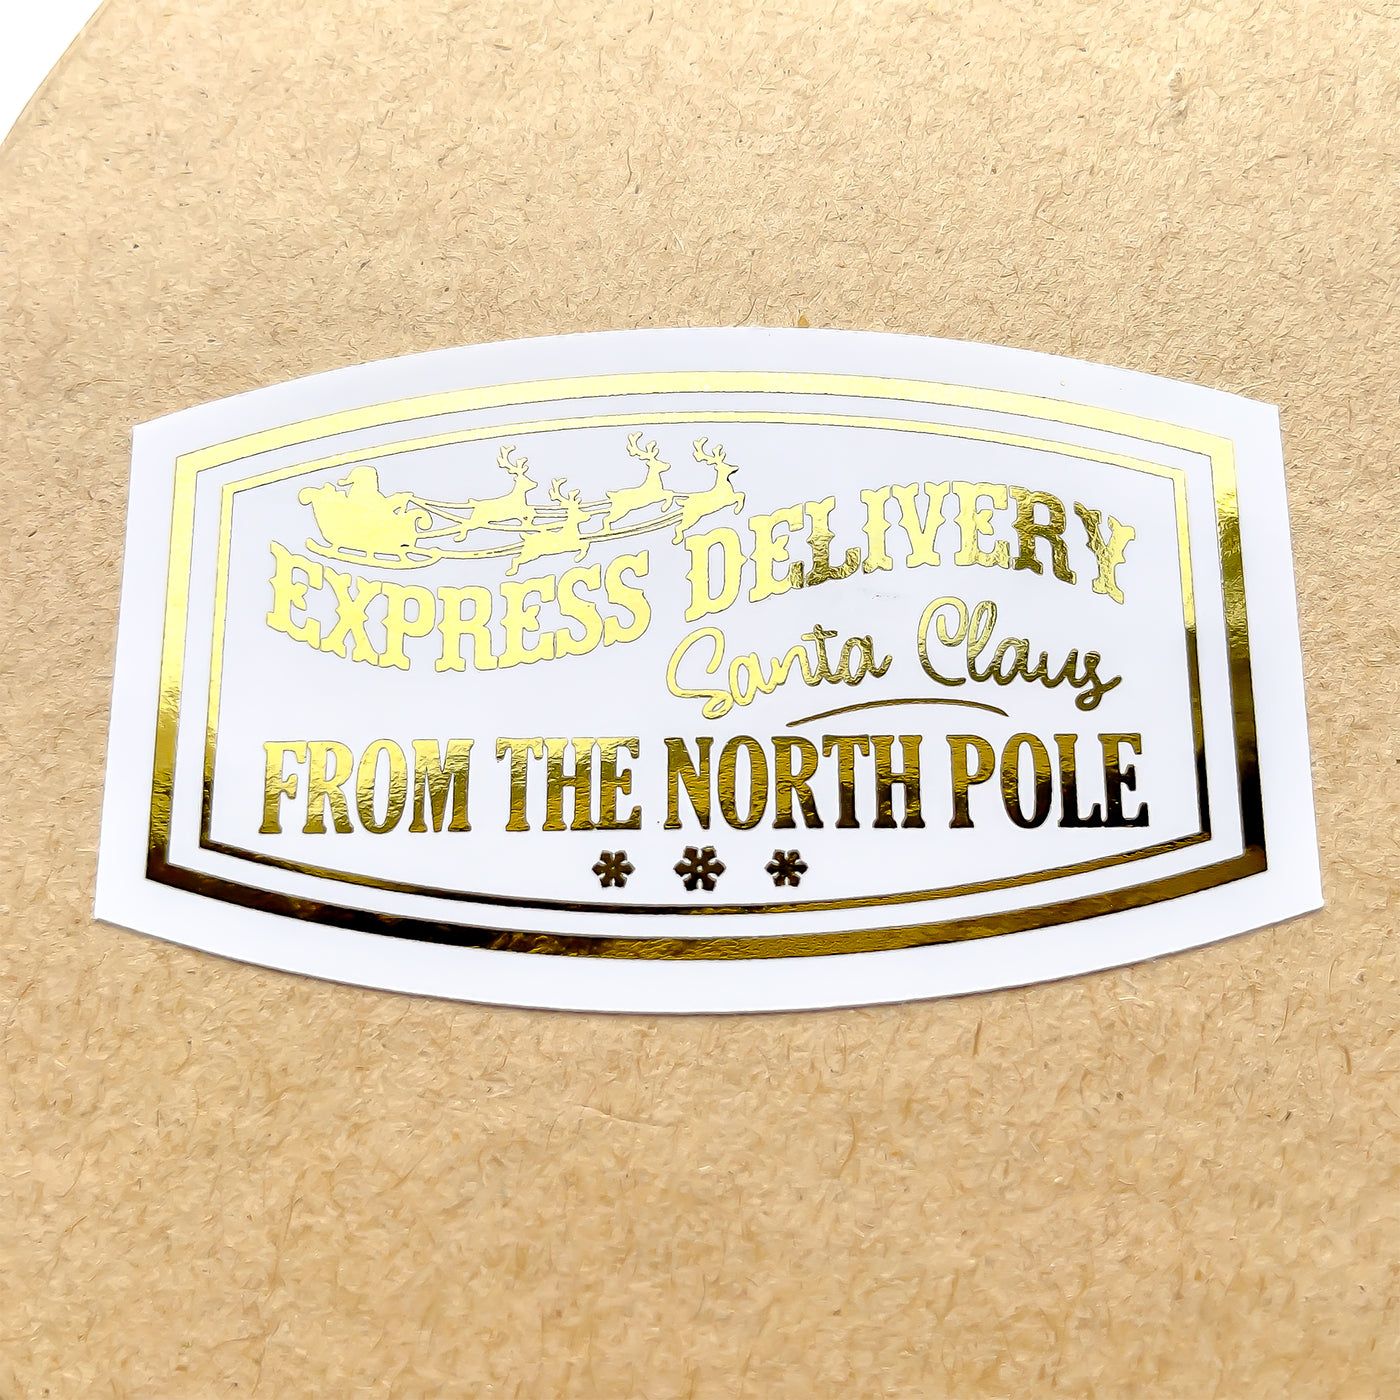 Foiled Express Delivery North Pole Stickers Shaped